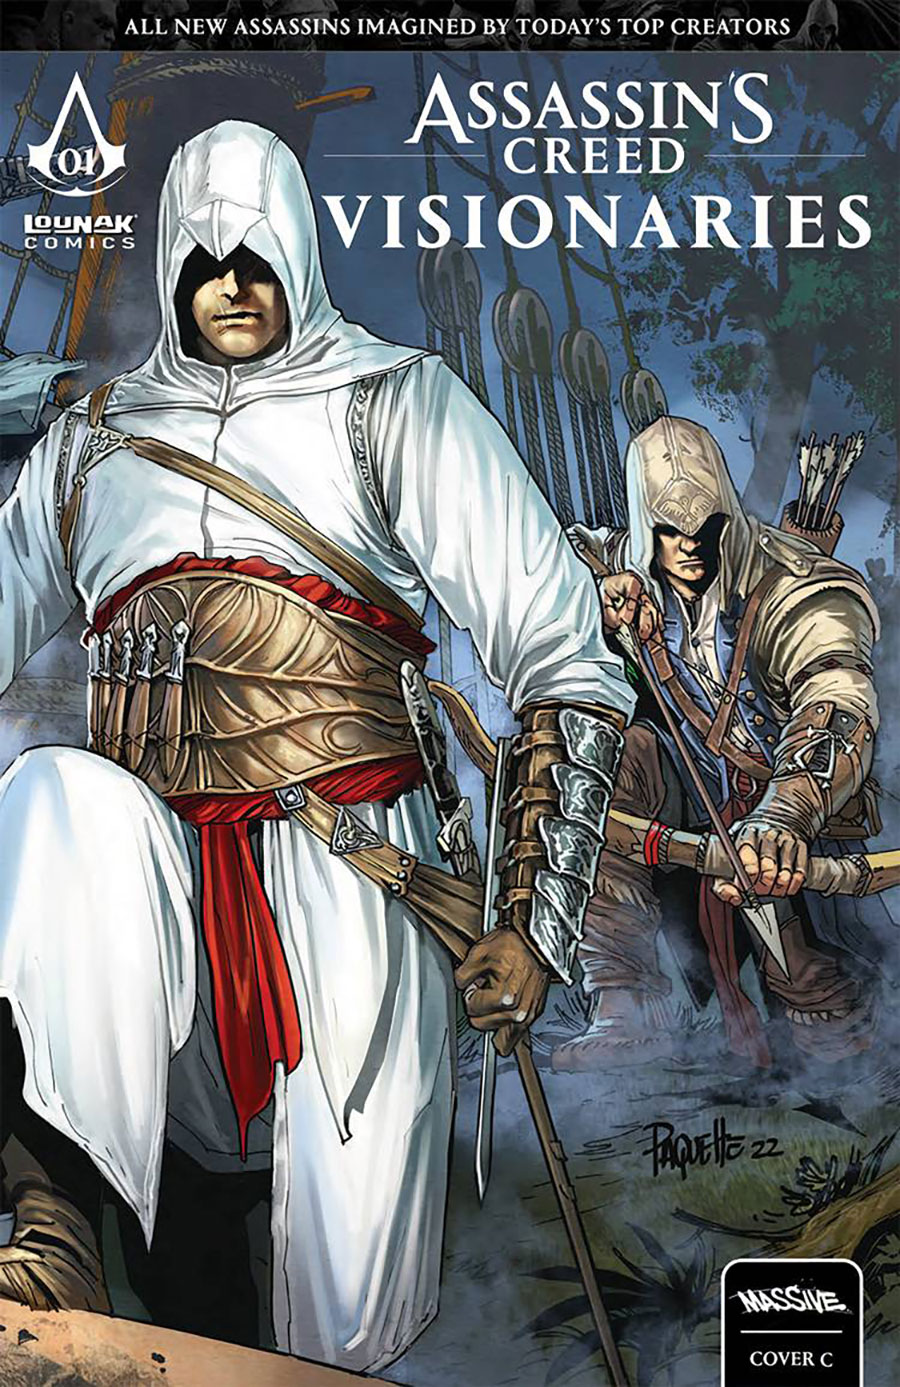 Assassins Creed Visionaries #1 Cover C Variant Yanick Paquette Connecting Cover (3 Of 3)